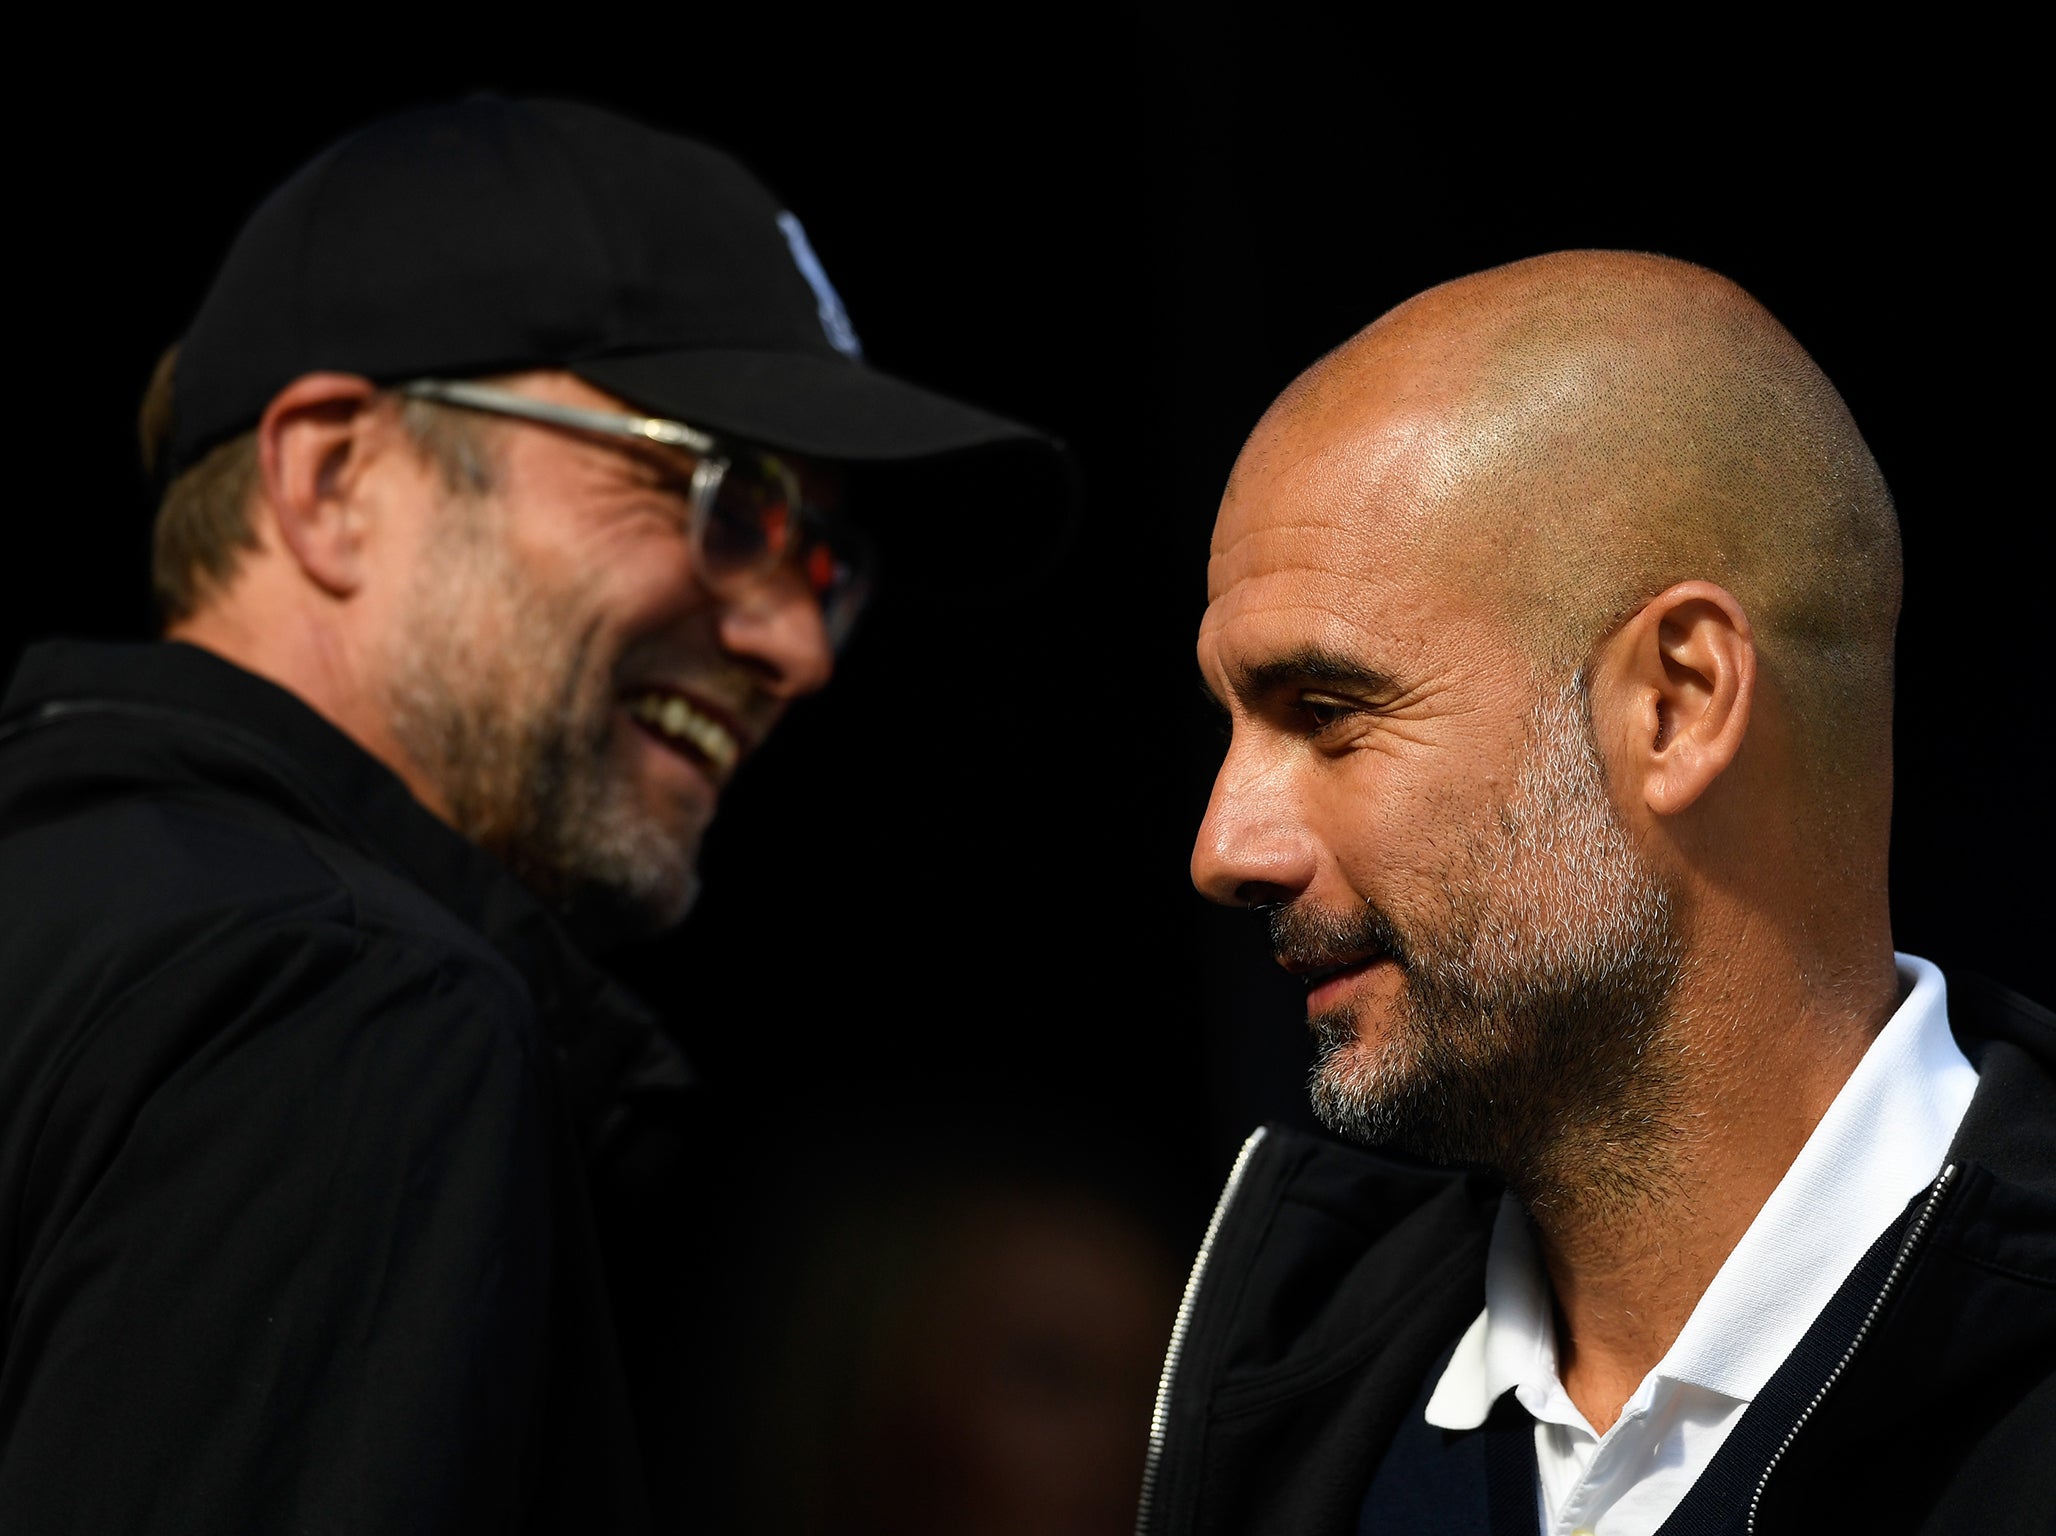 Jurgen Klopp and Pep Guardiola will go head to head in the Champions League